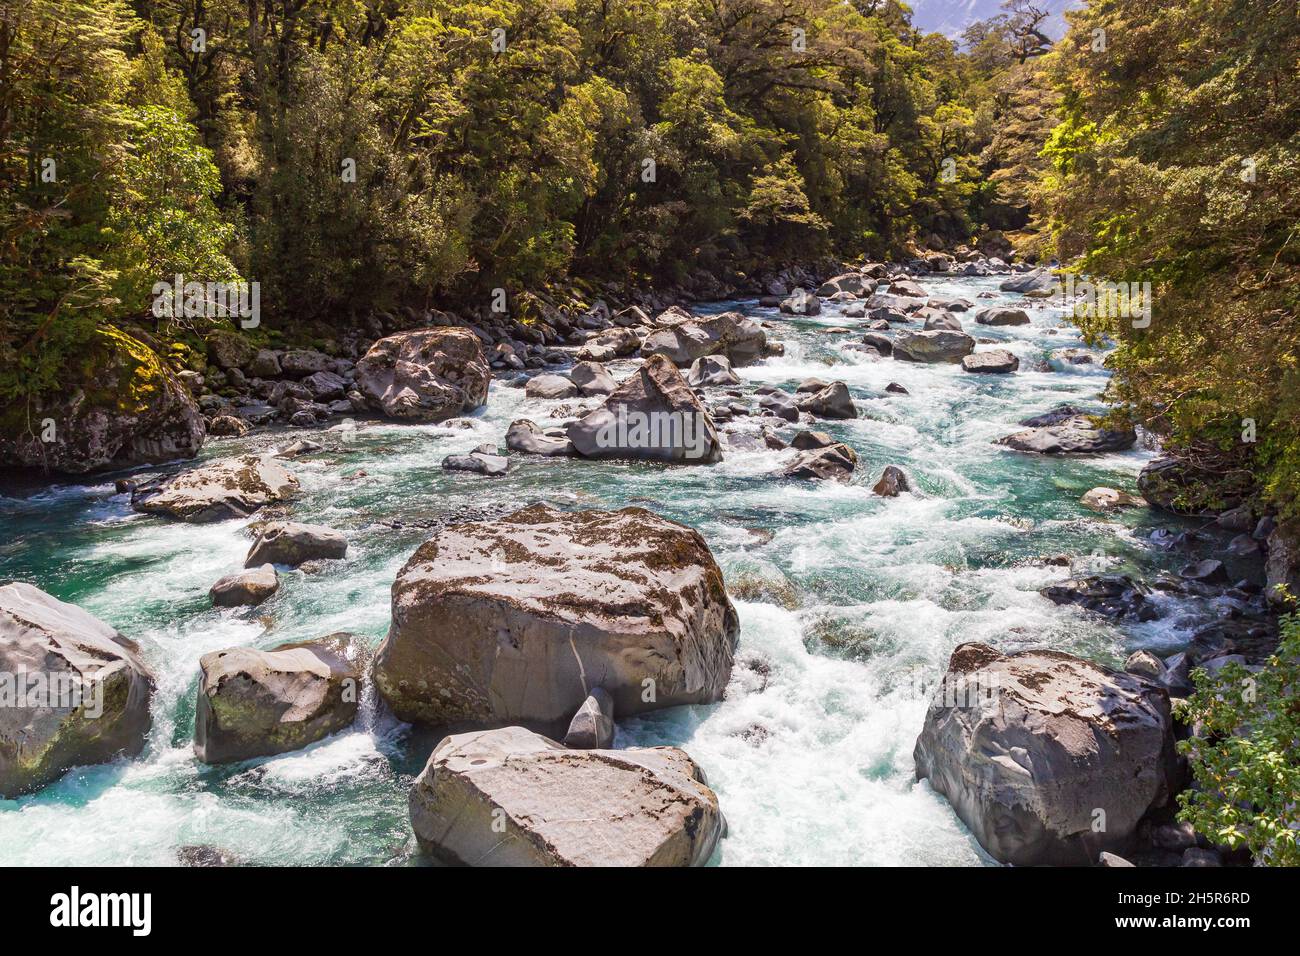 Fiordland National Park. Small fast river in the forest. New Zealand Stock Photo